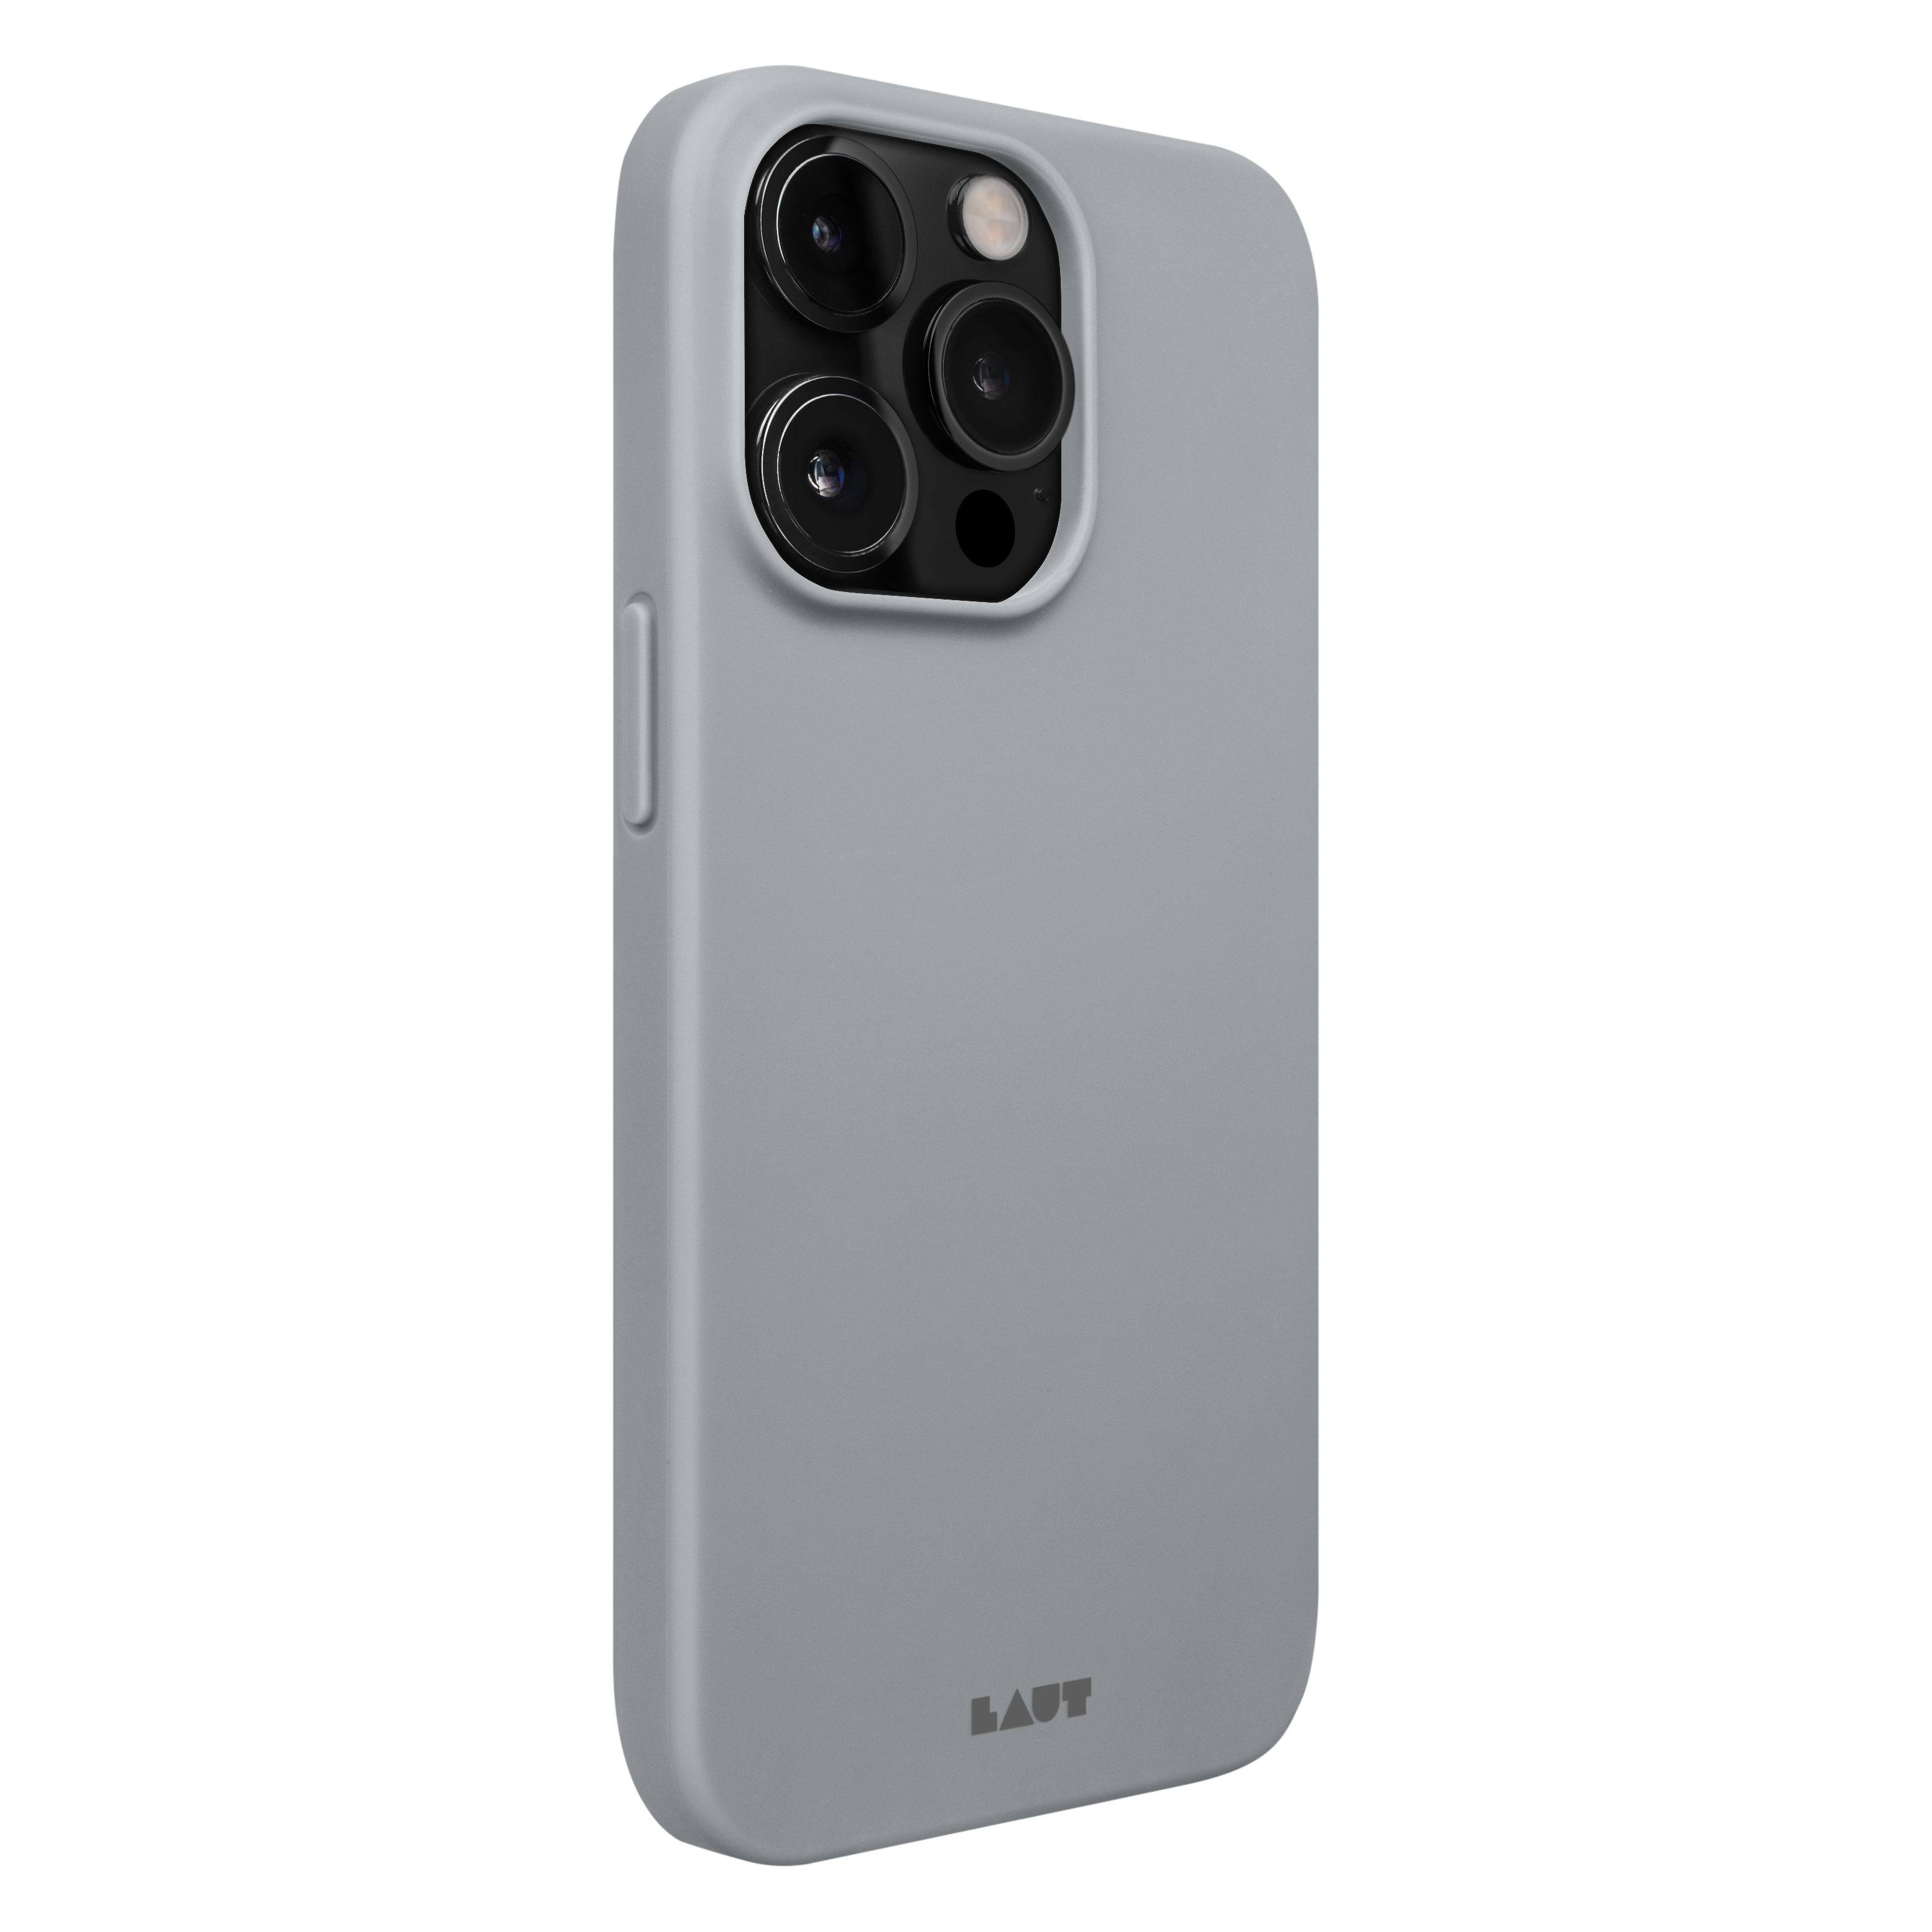 PRO GREY Huex, 14 LAUT IPHONE APPLE, Backcover, MAX,